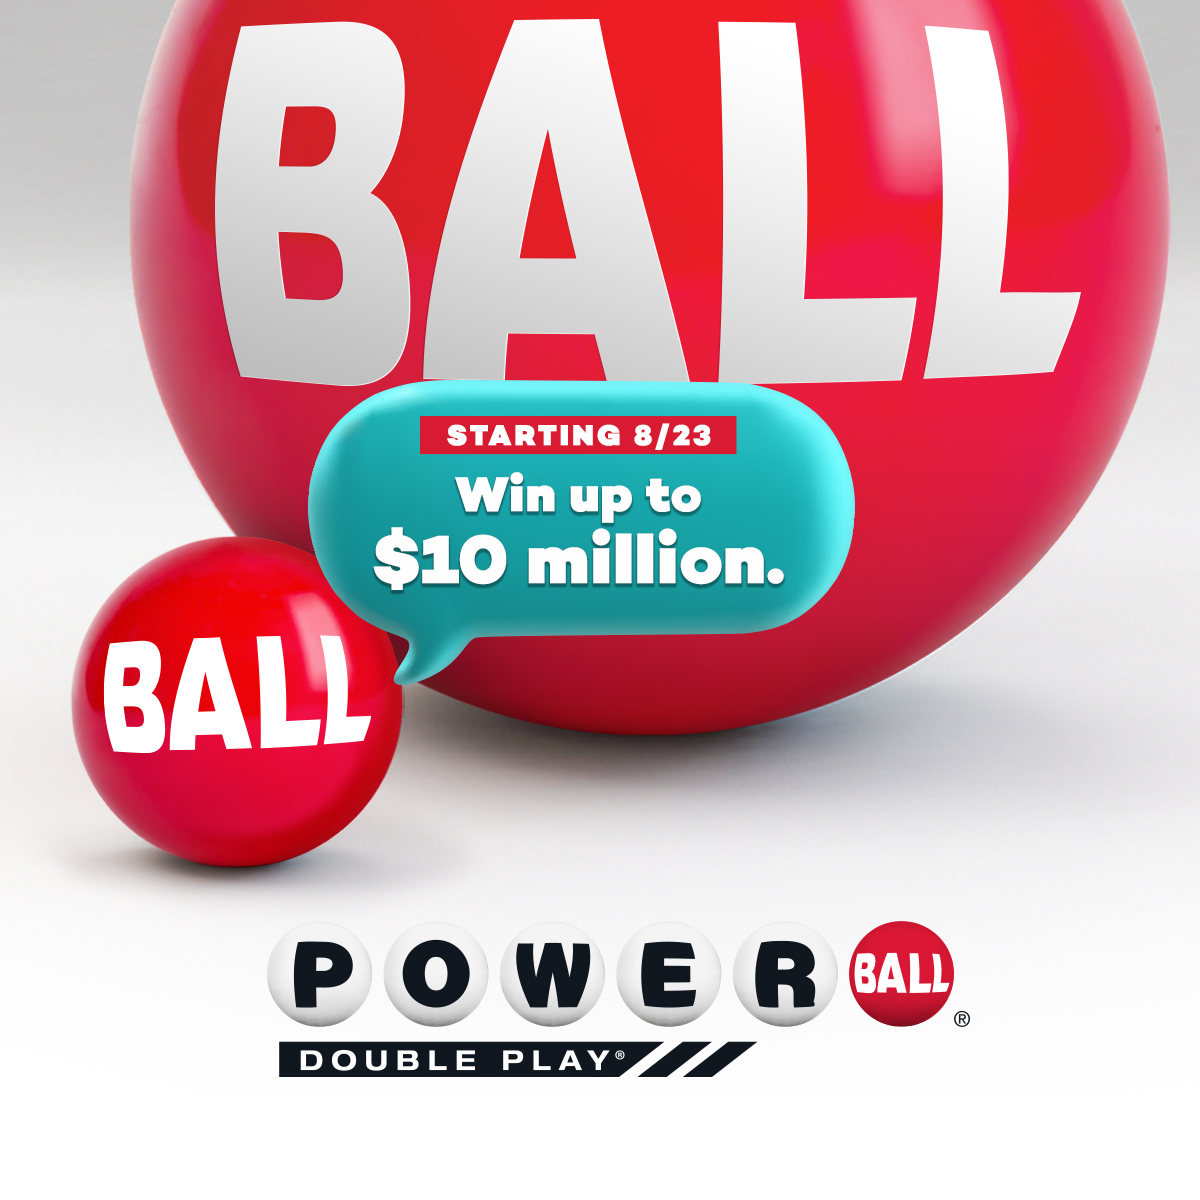 Get ready! Powerball Double Play starts August 23rd! Double Play is a second drawing where you could win up to $10 million on the same numbers you play for Powerball. Please play responsibly. Learn more: https://t.co/C6SarbSDz1 https://t.co/TOdHHg0AA4